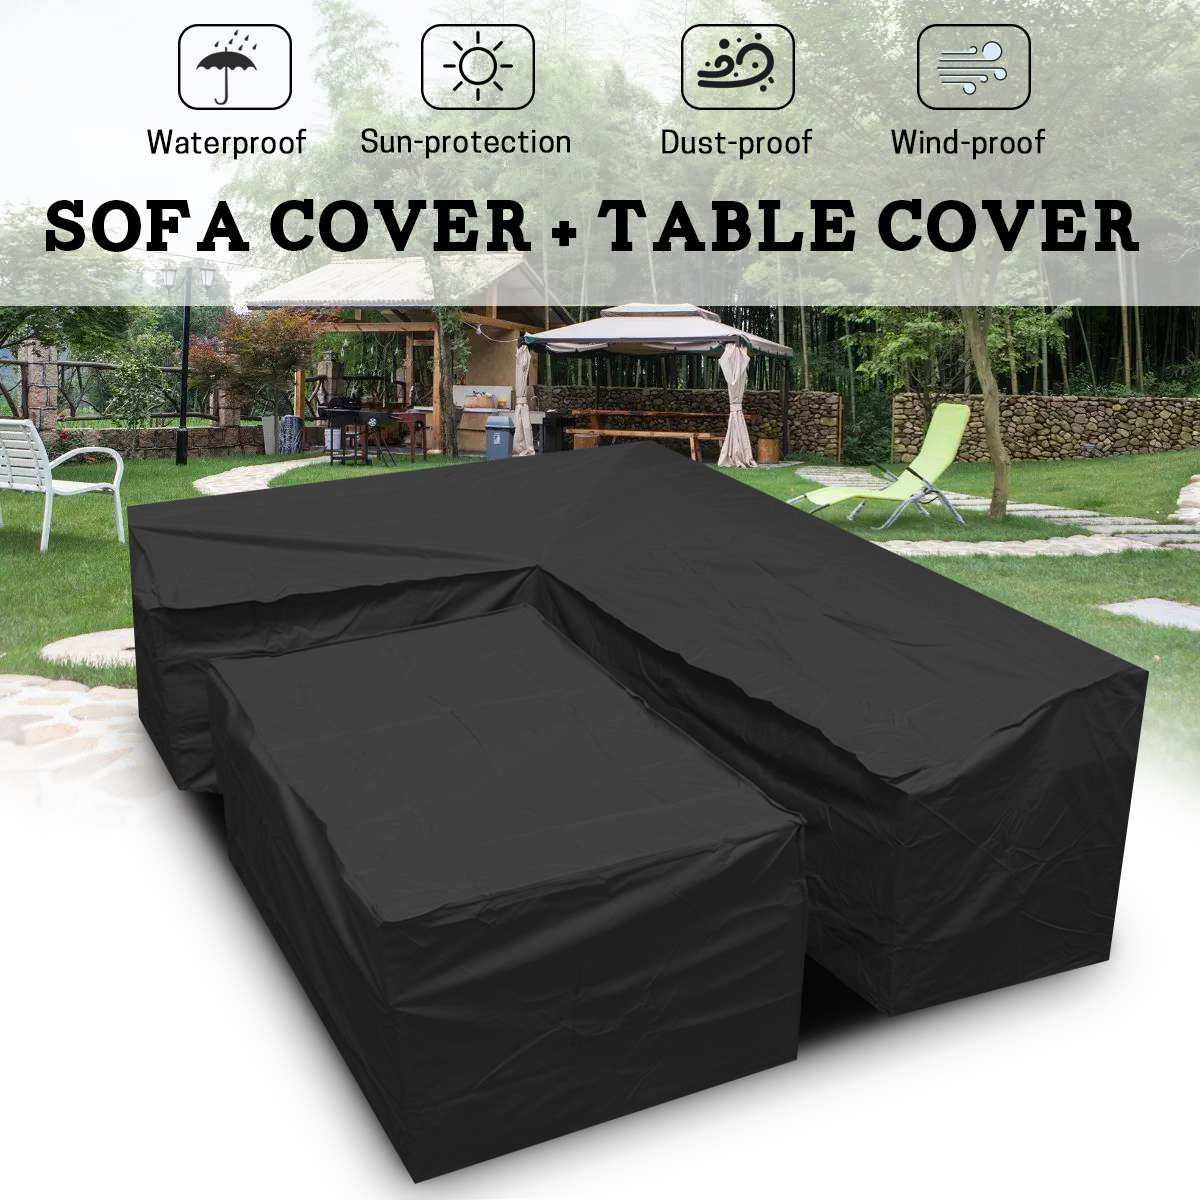 Us 3069 32 Offwaterproof Shape Furniture Covers Outdoor Patio Garden Lrain Snow Chair Covers Sofa Table Chair Dust Proof Protector Cover In intended for sizing 1200 X 1200